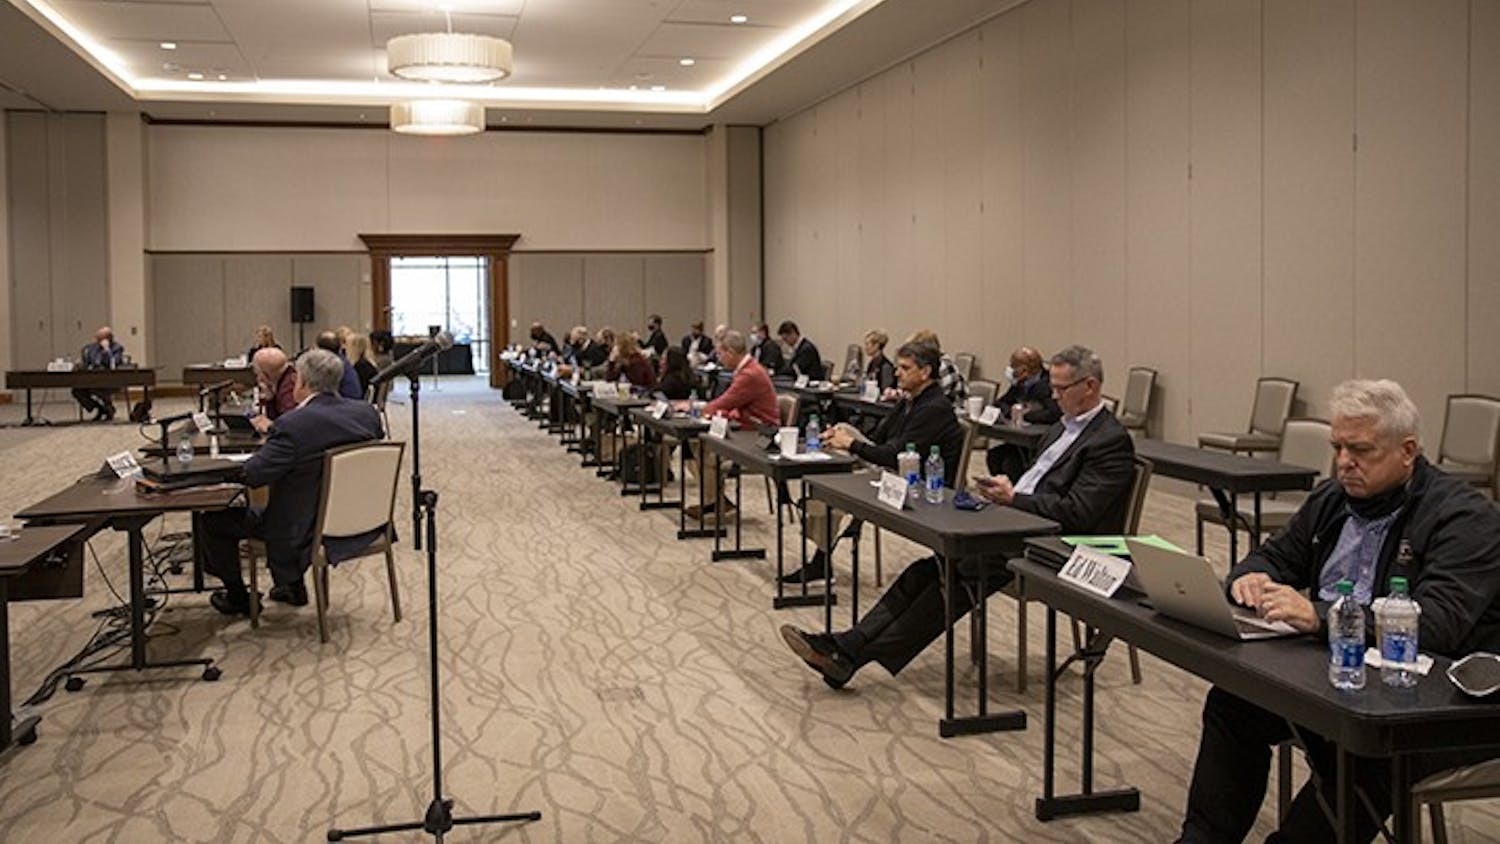 University of South Carolina board of trustee members meet at the Alumni Center during the 2021 board of trustees retreat to discuss issues, concerns and goals for the 2021 year.